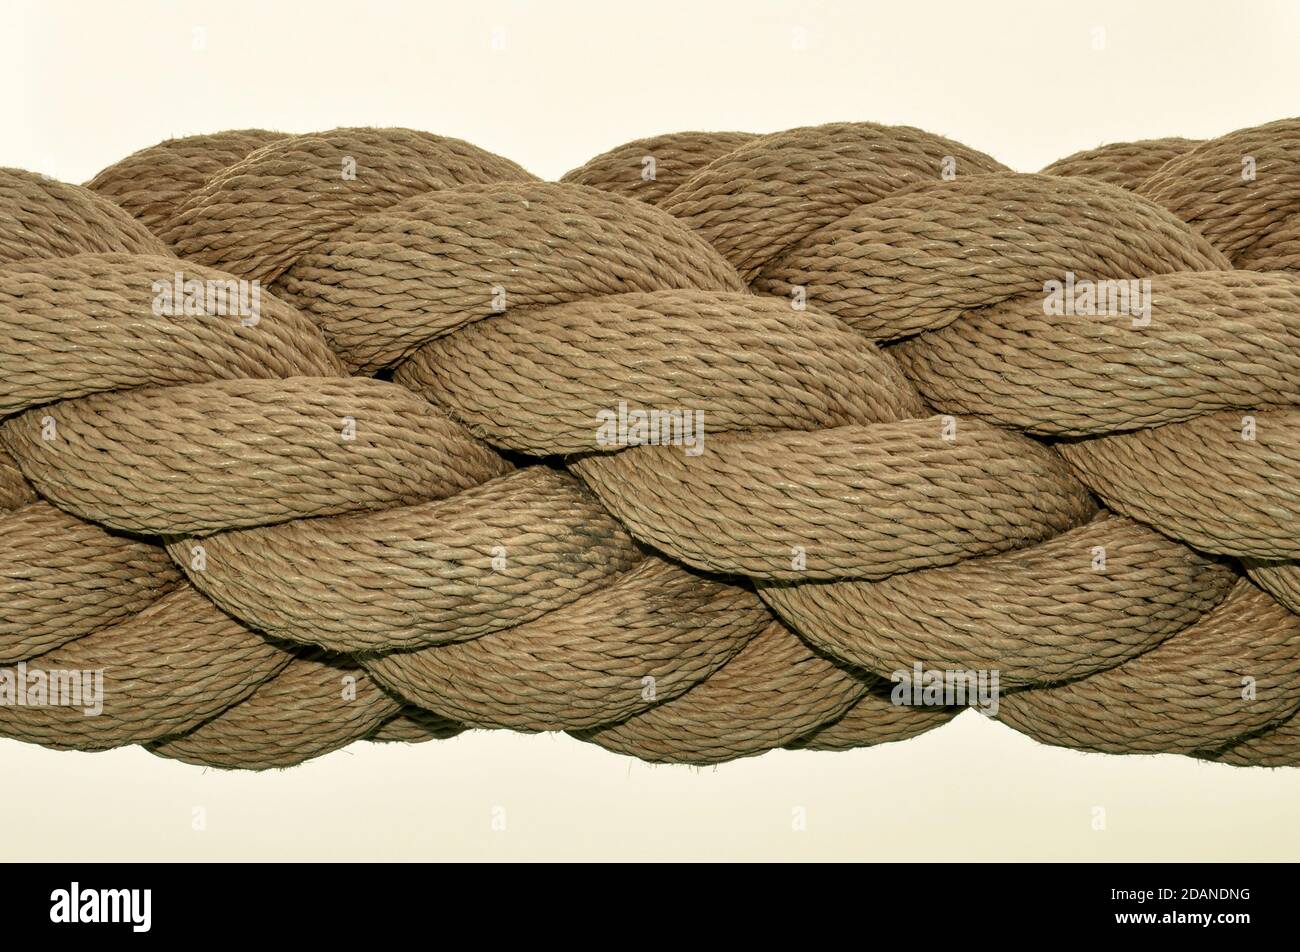 A black and white close up image of a thick industrial rope, with many rope lengths coiled together in a spiral. Stock Photo